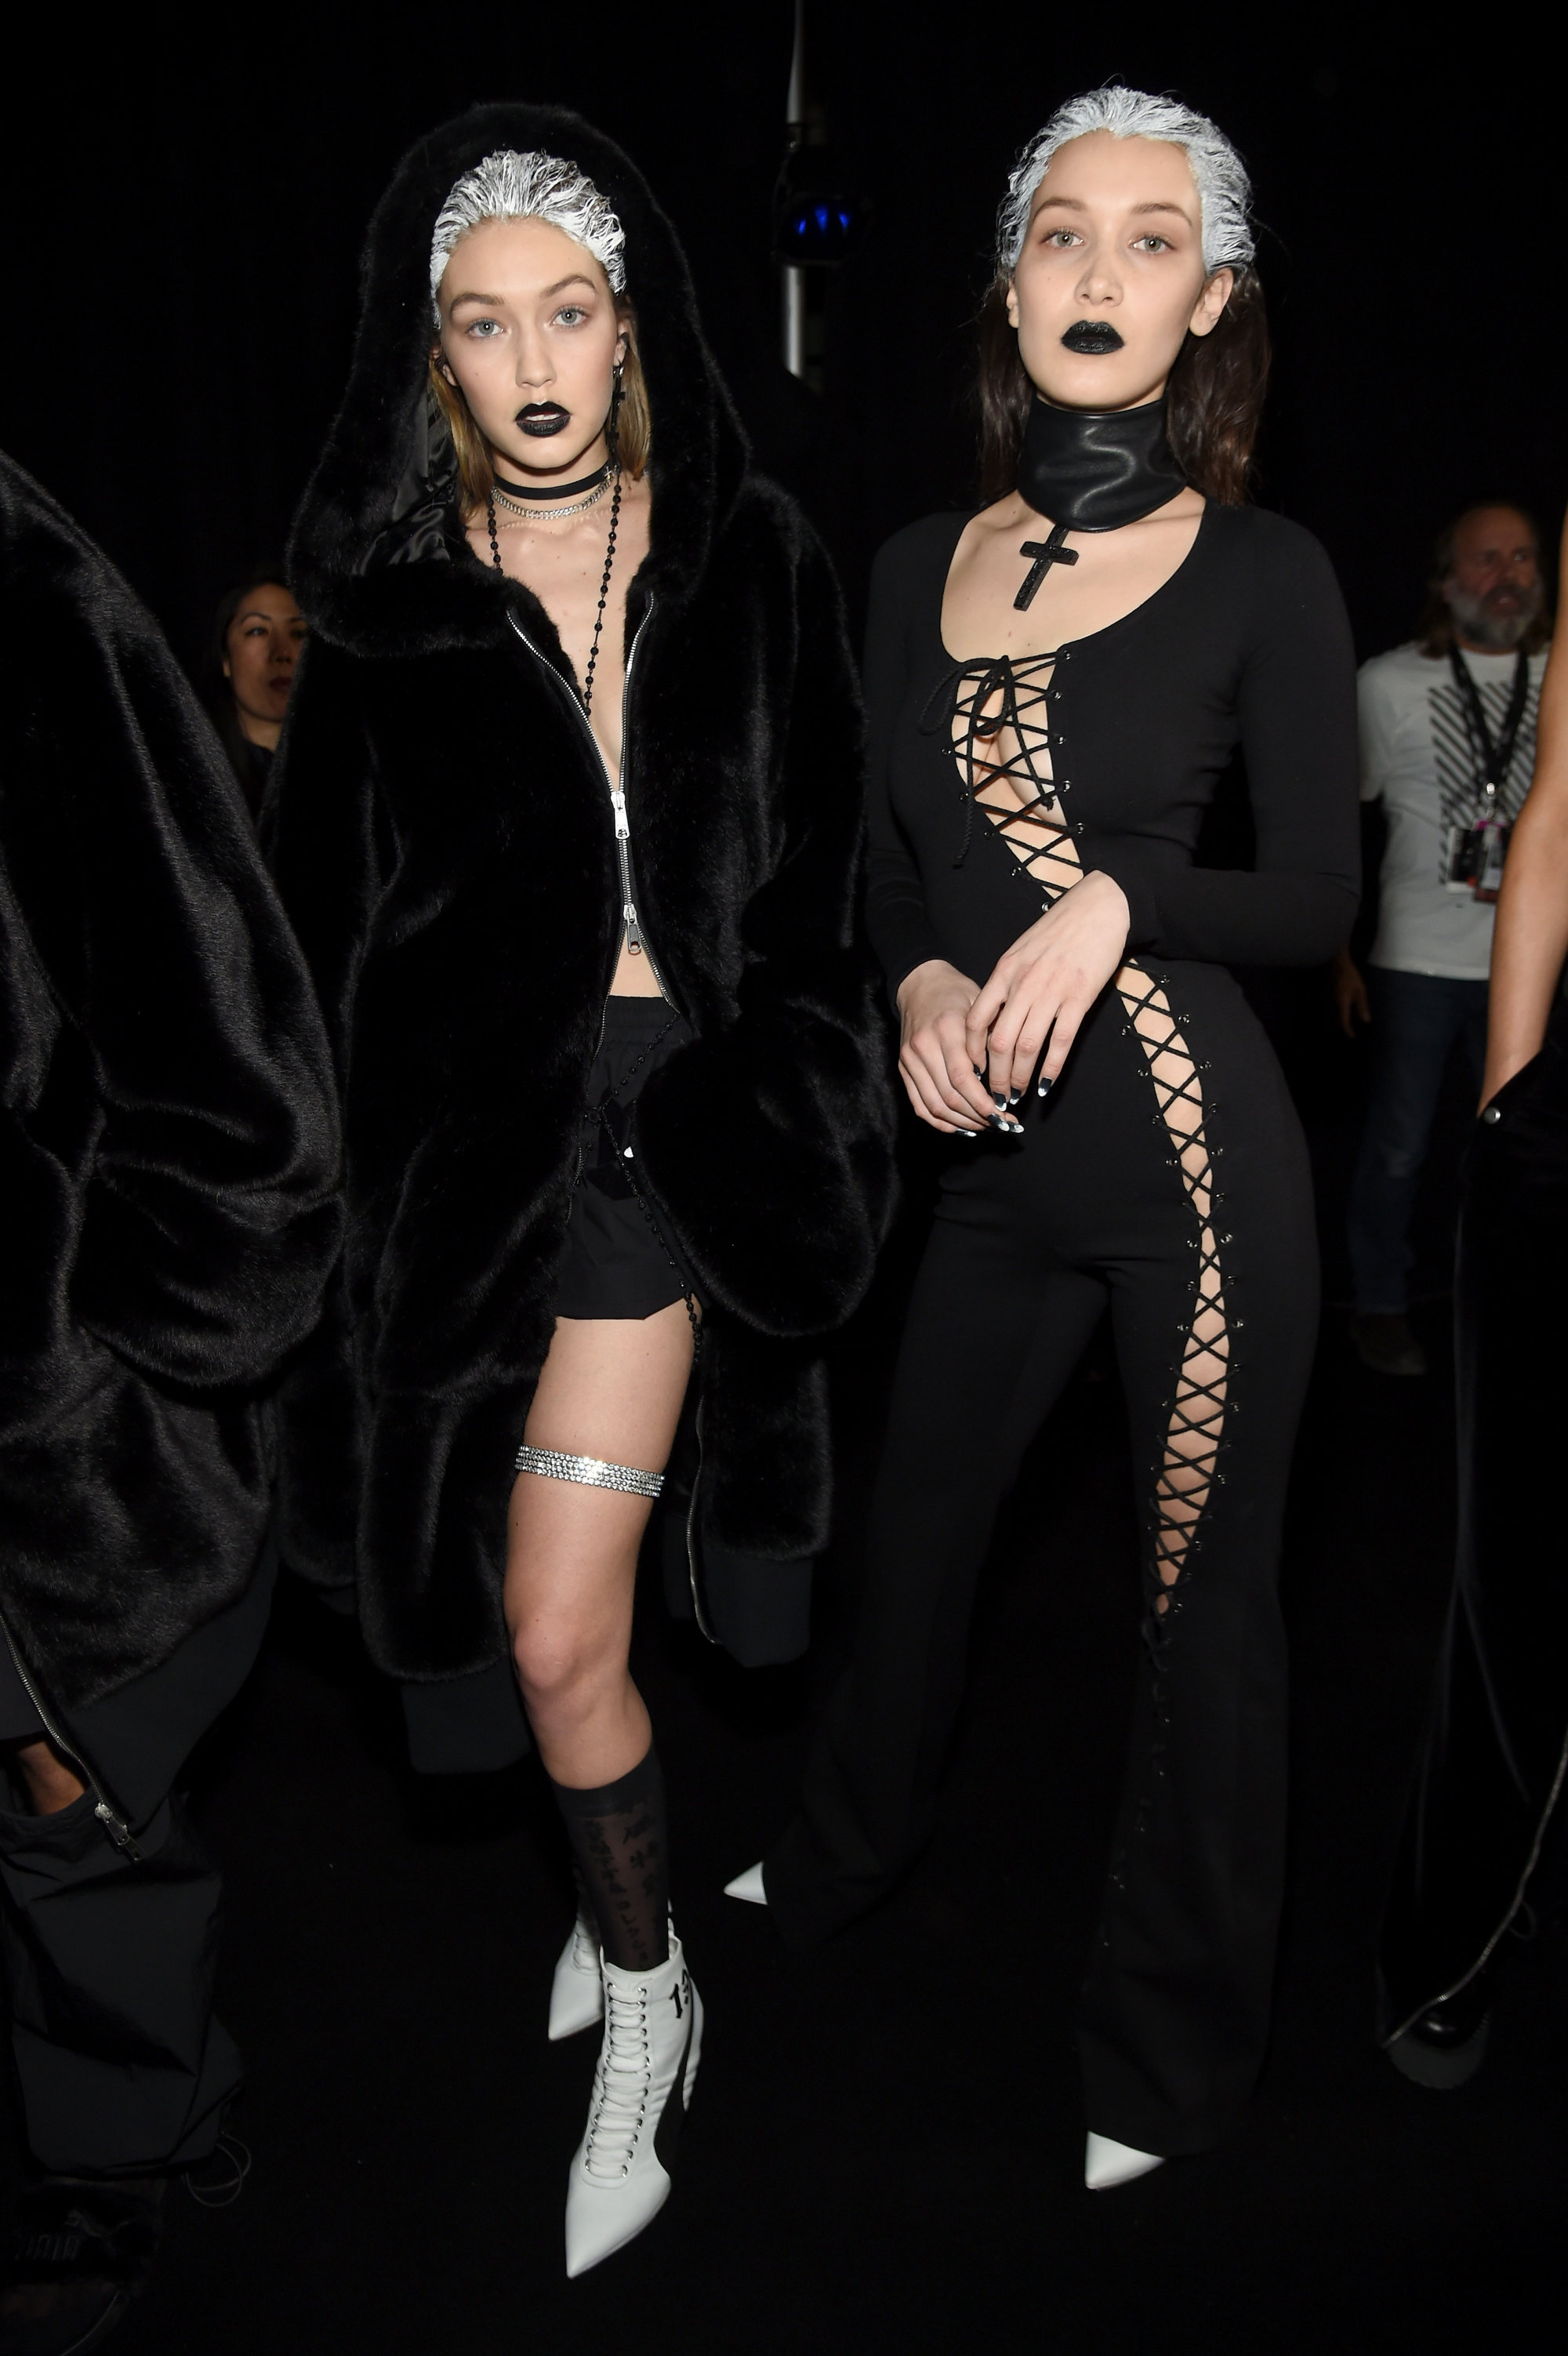 Here's How Gigi and Bella Hadid Do Coordinated Going-Out Outfits